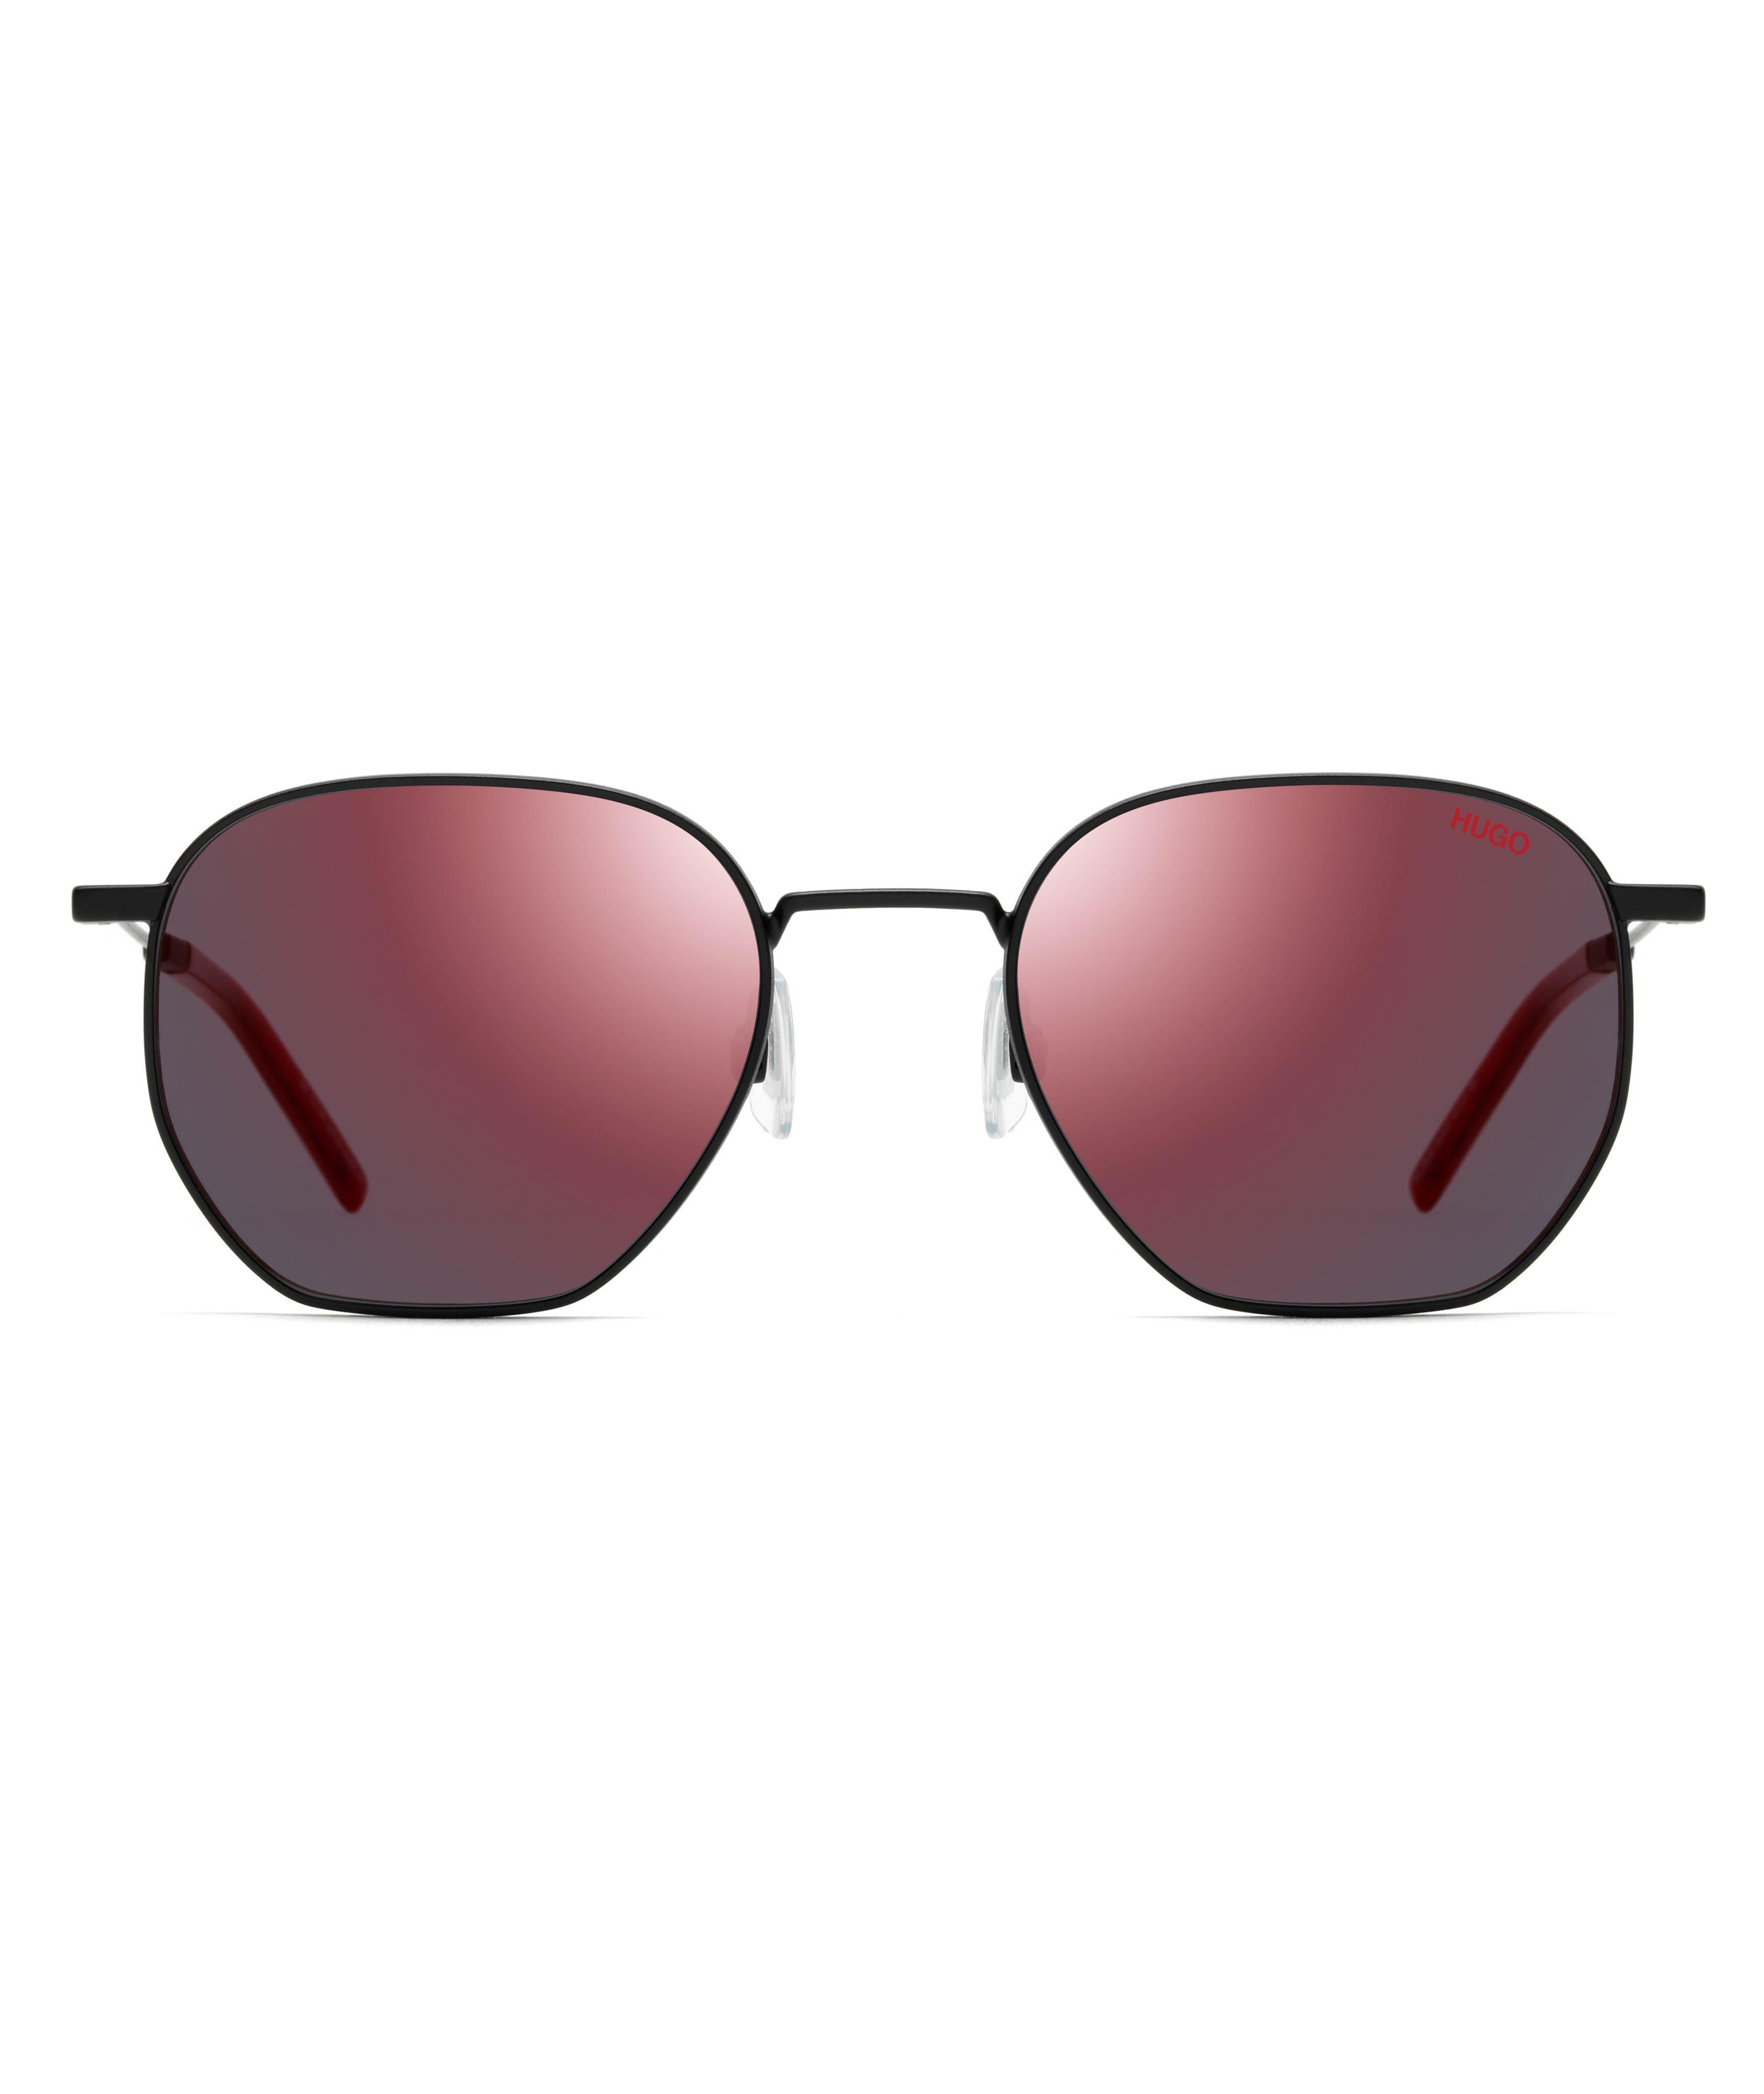 Hugo Black Red Sunglasses With Red Mirror Lenses image 0